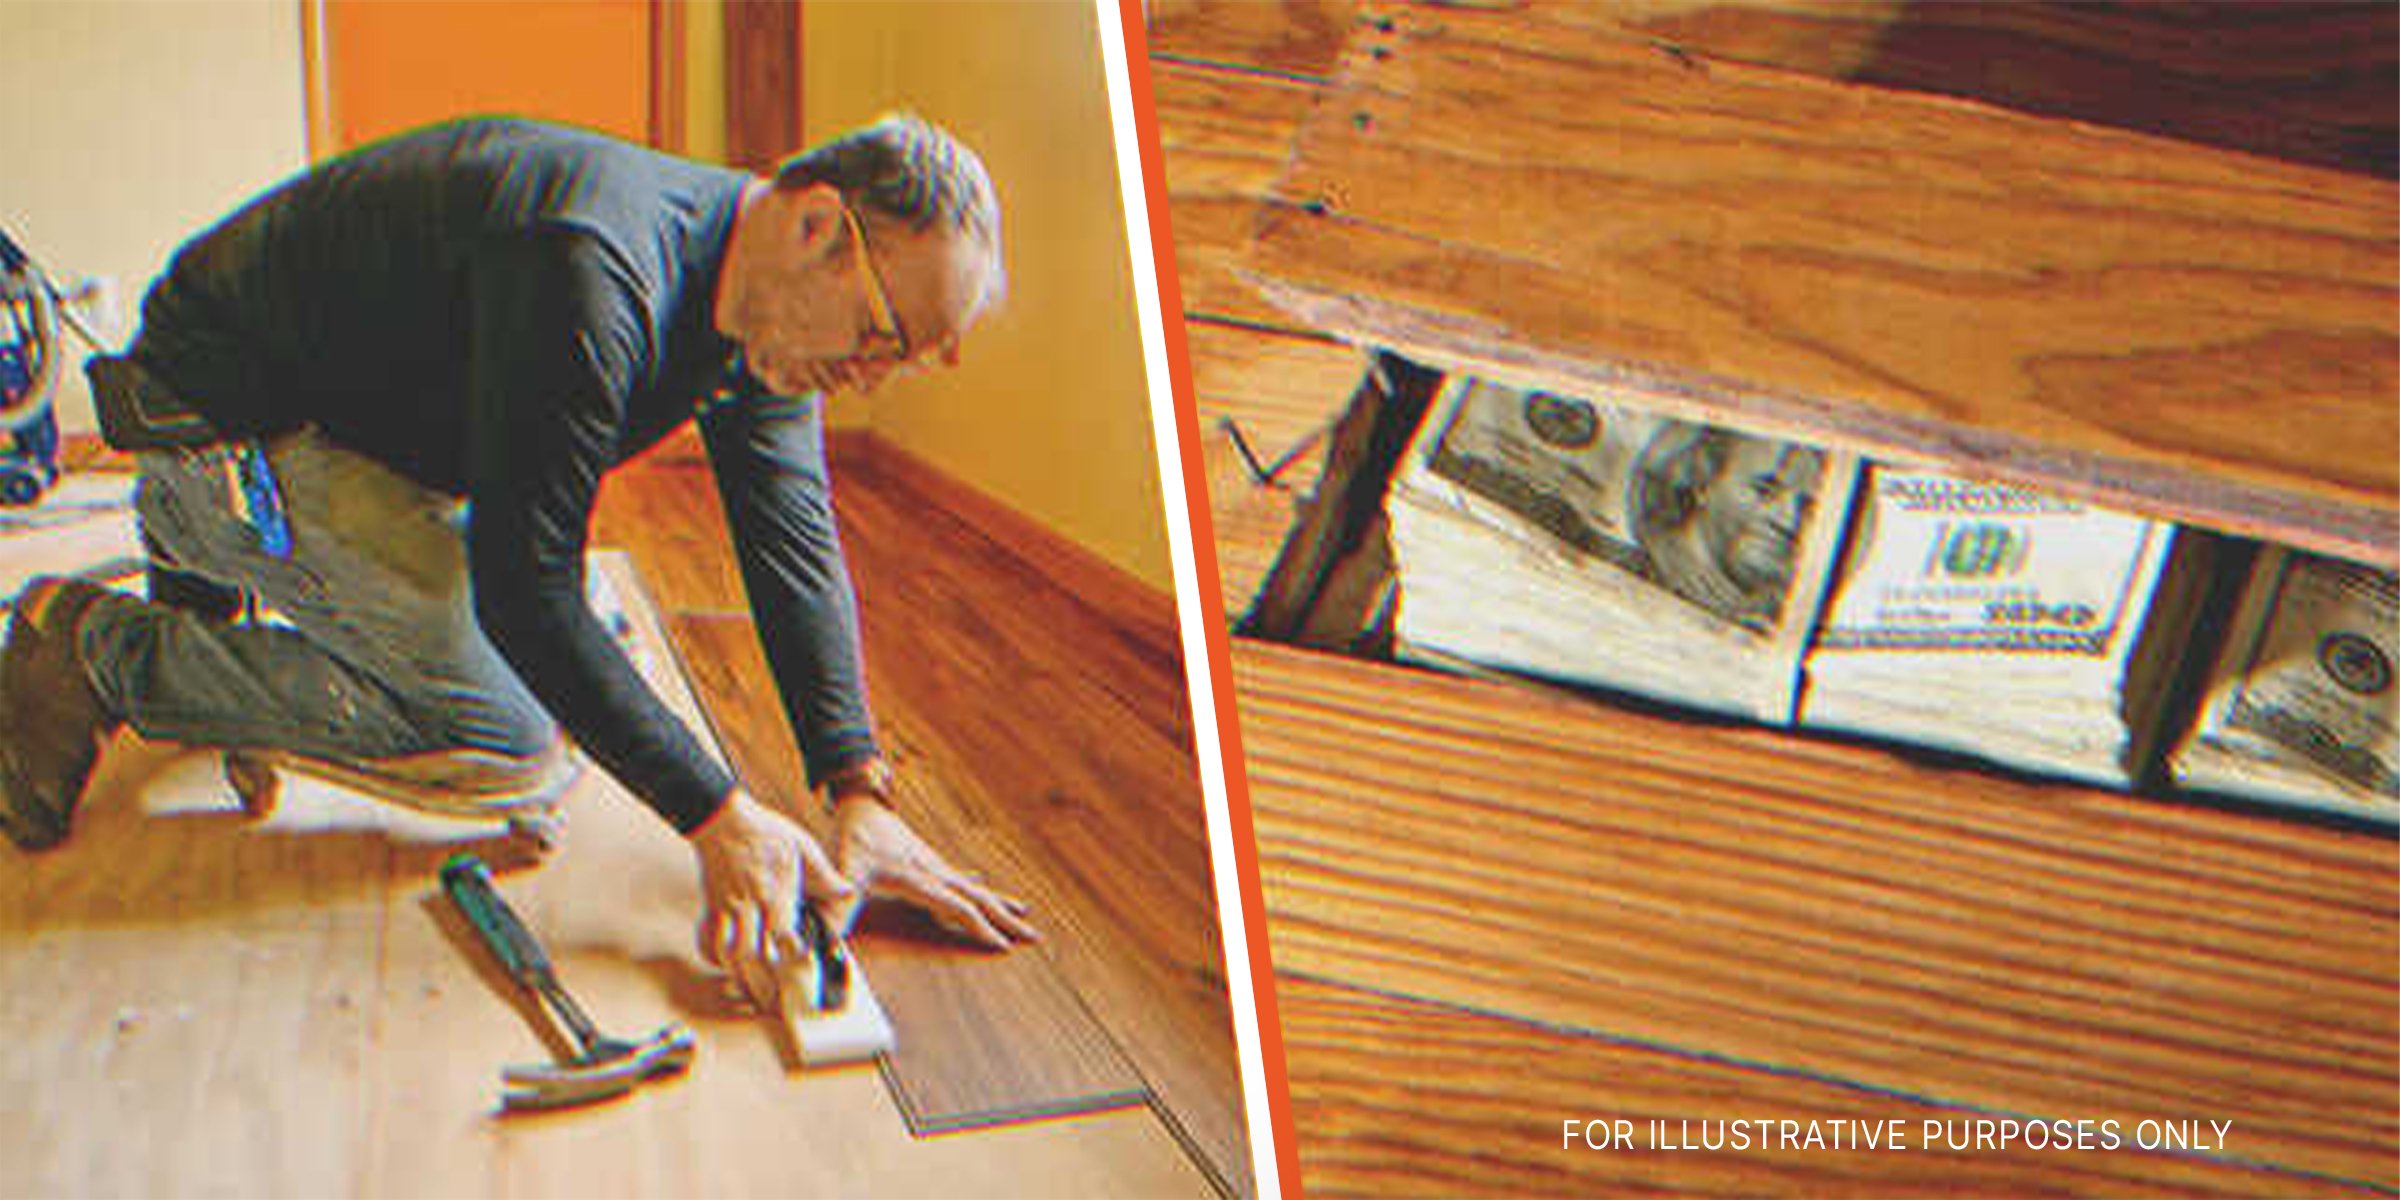 Man finds cash in floorboards. | Source: Getty Images